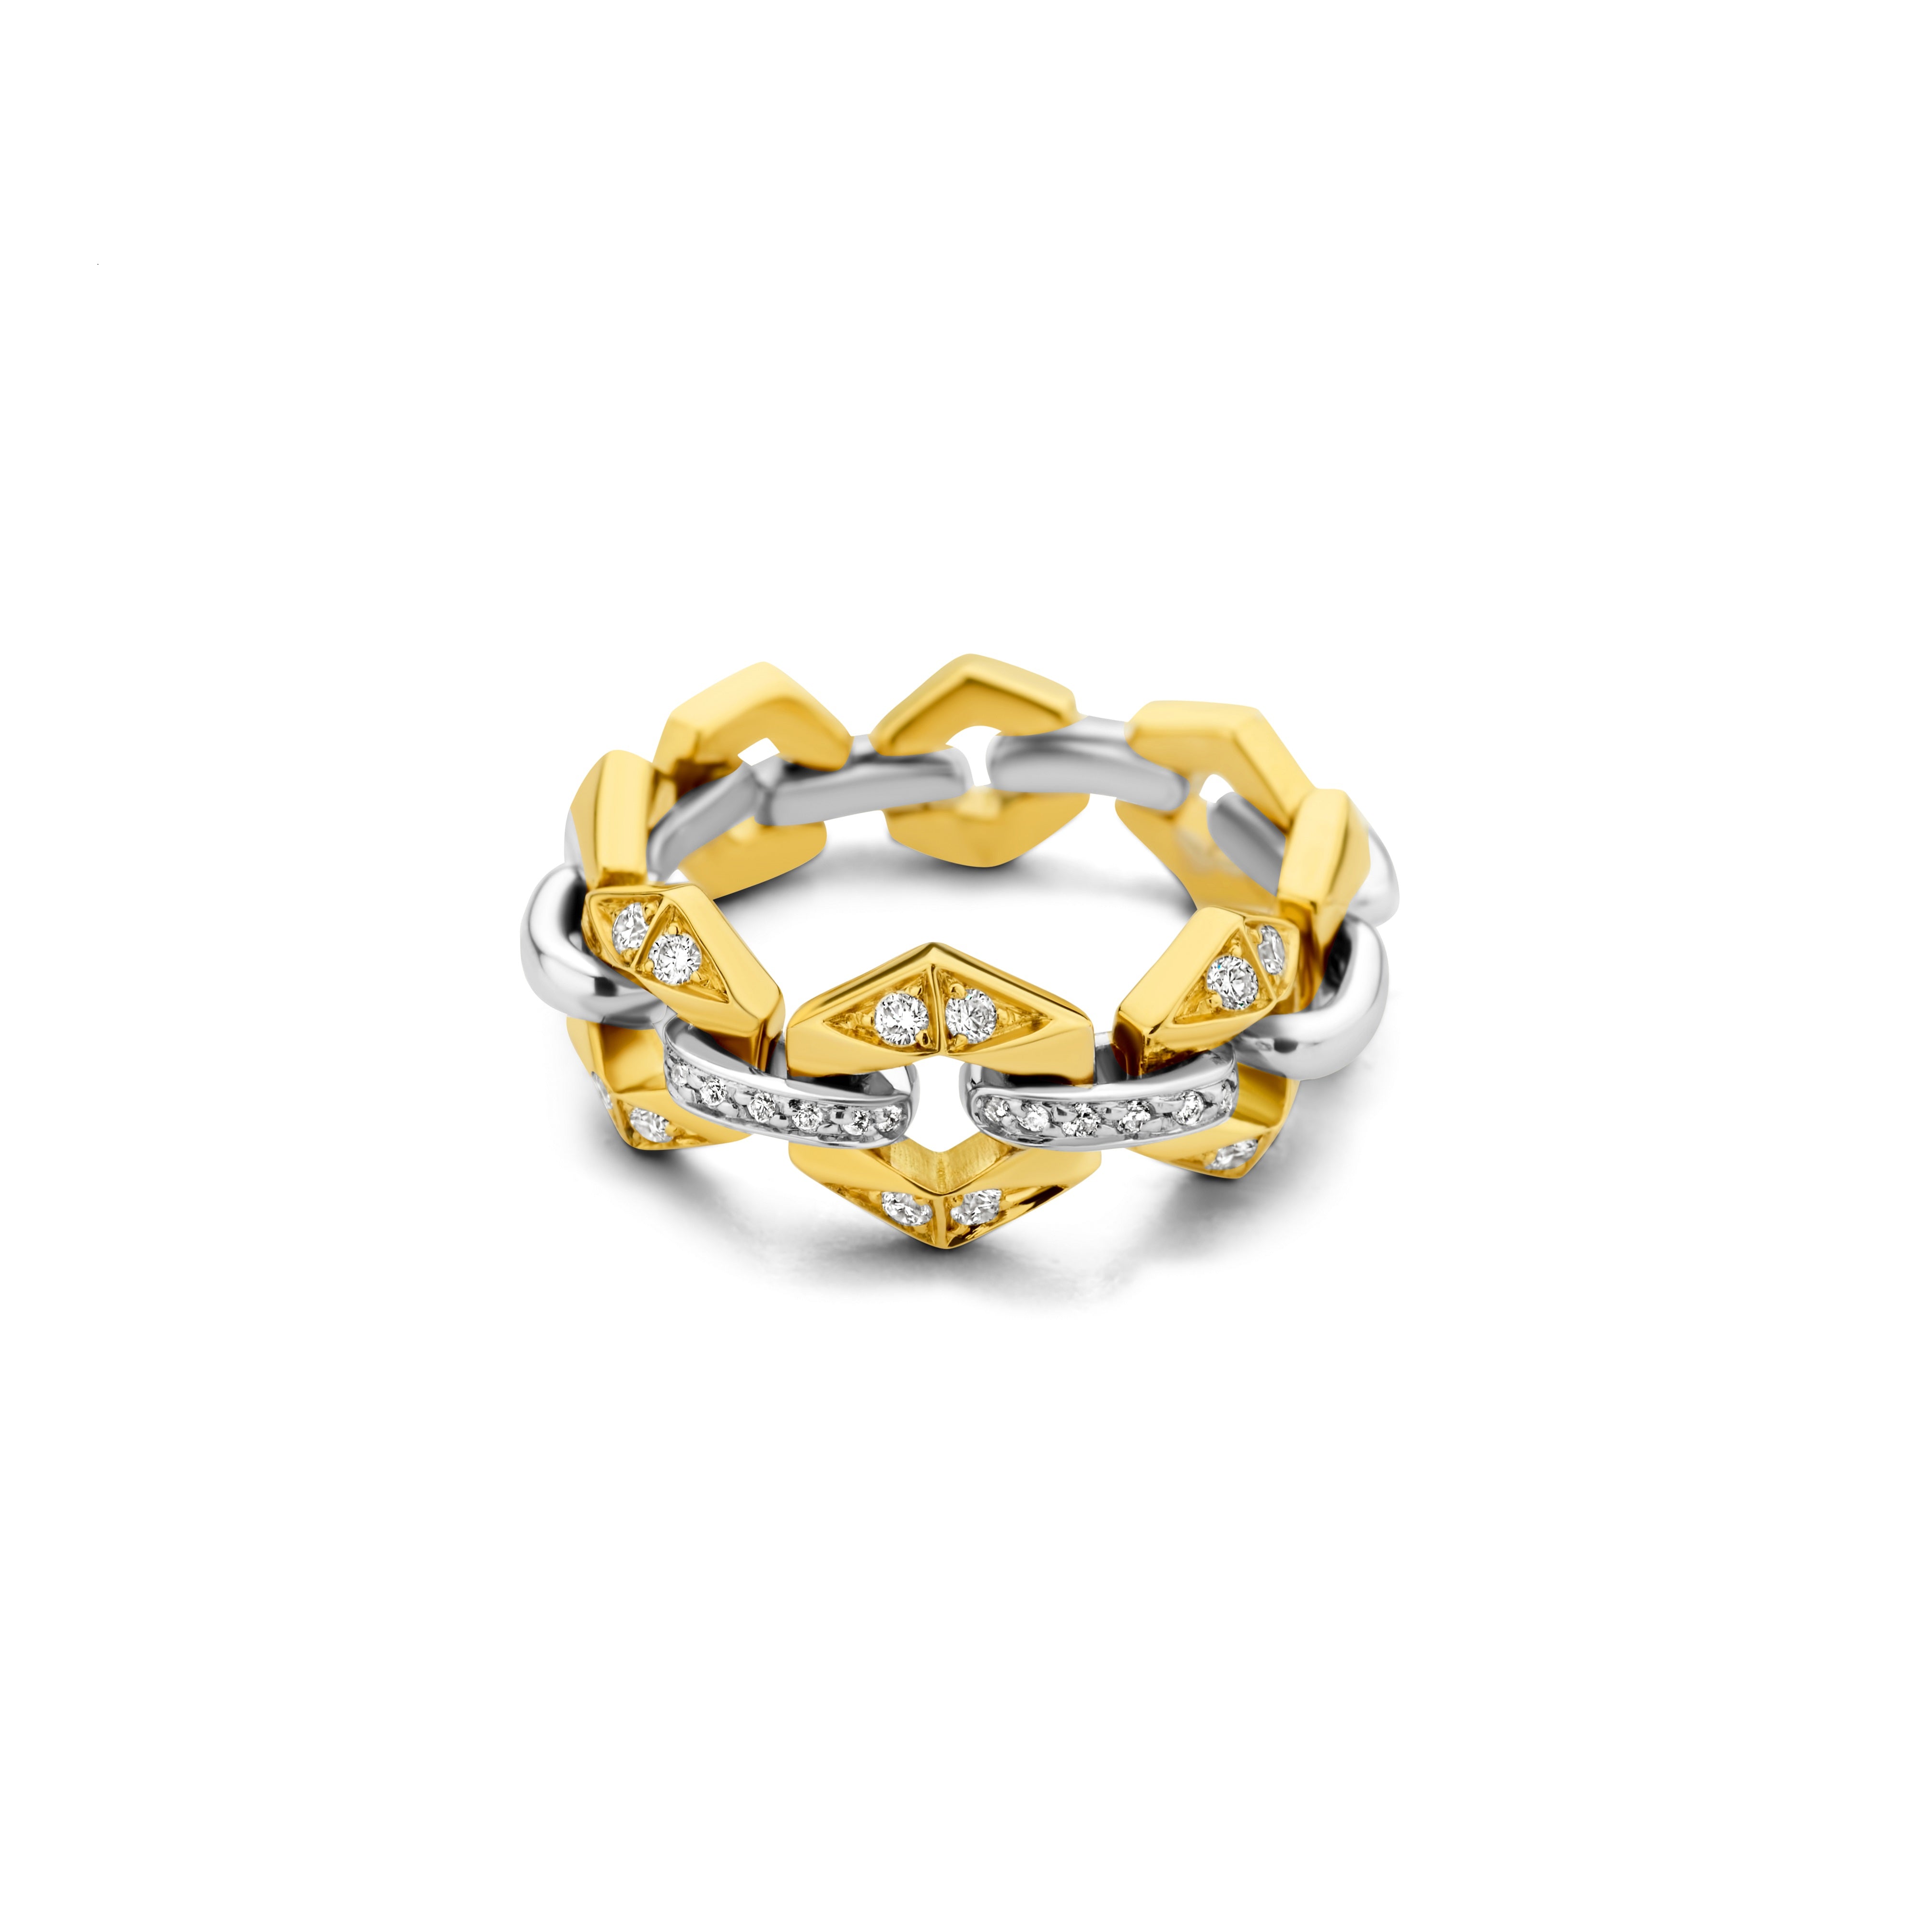 BOND FLOW RING IN BICOLOR GOLD WITH WHITE DIAMONDS